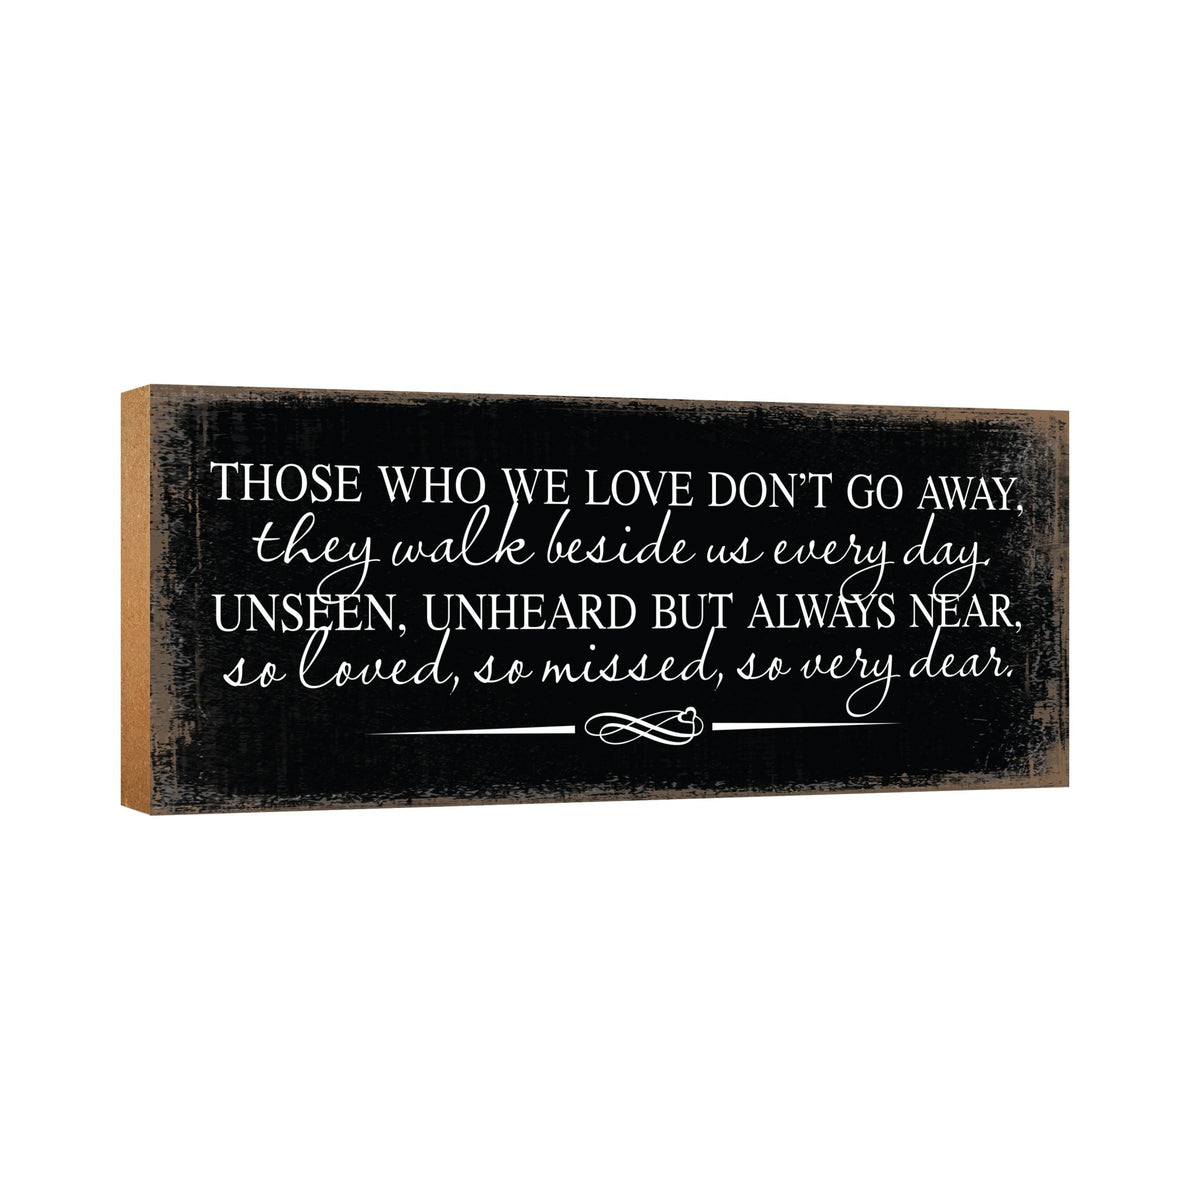 Modern Inspirational Pet Memorial 4x10 inches Wooden Sign (Those Who We Love) Tabletop Plaque Home Decoration Loss of Pet Bereavement Sympathy Keepsake - LifeSong Milestones